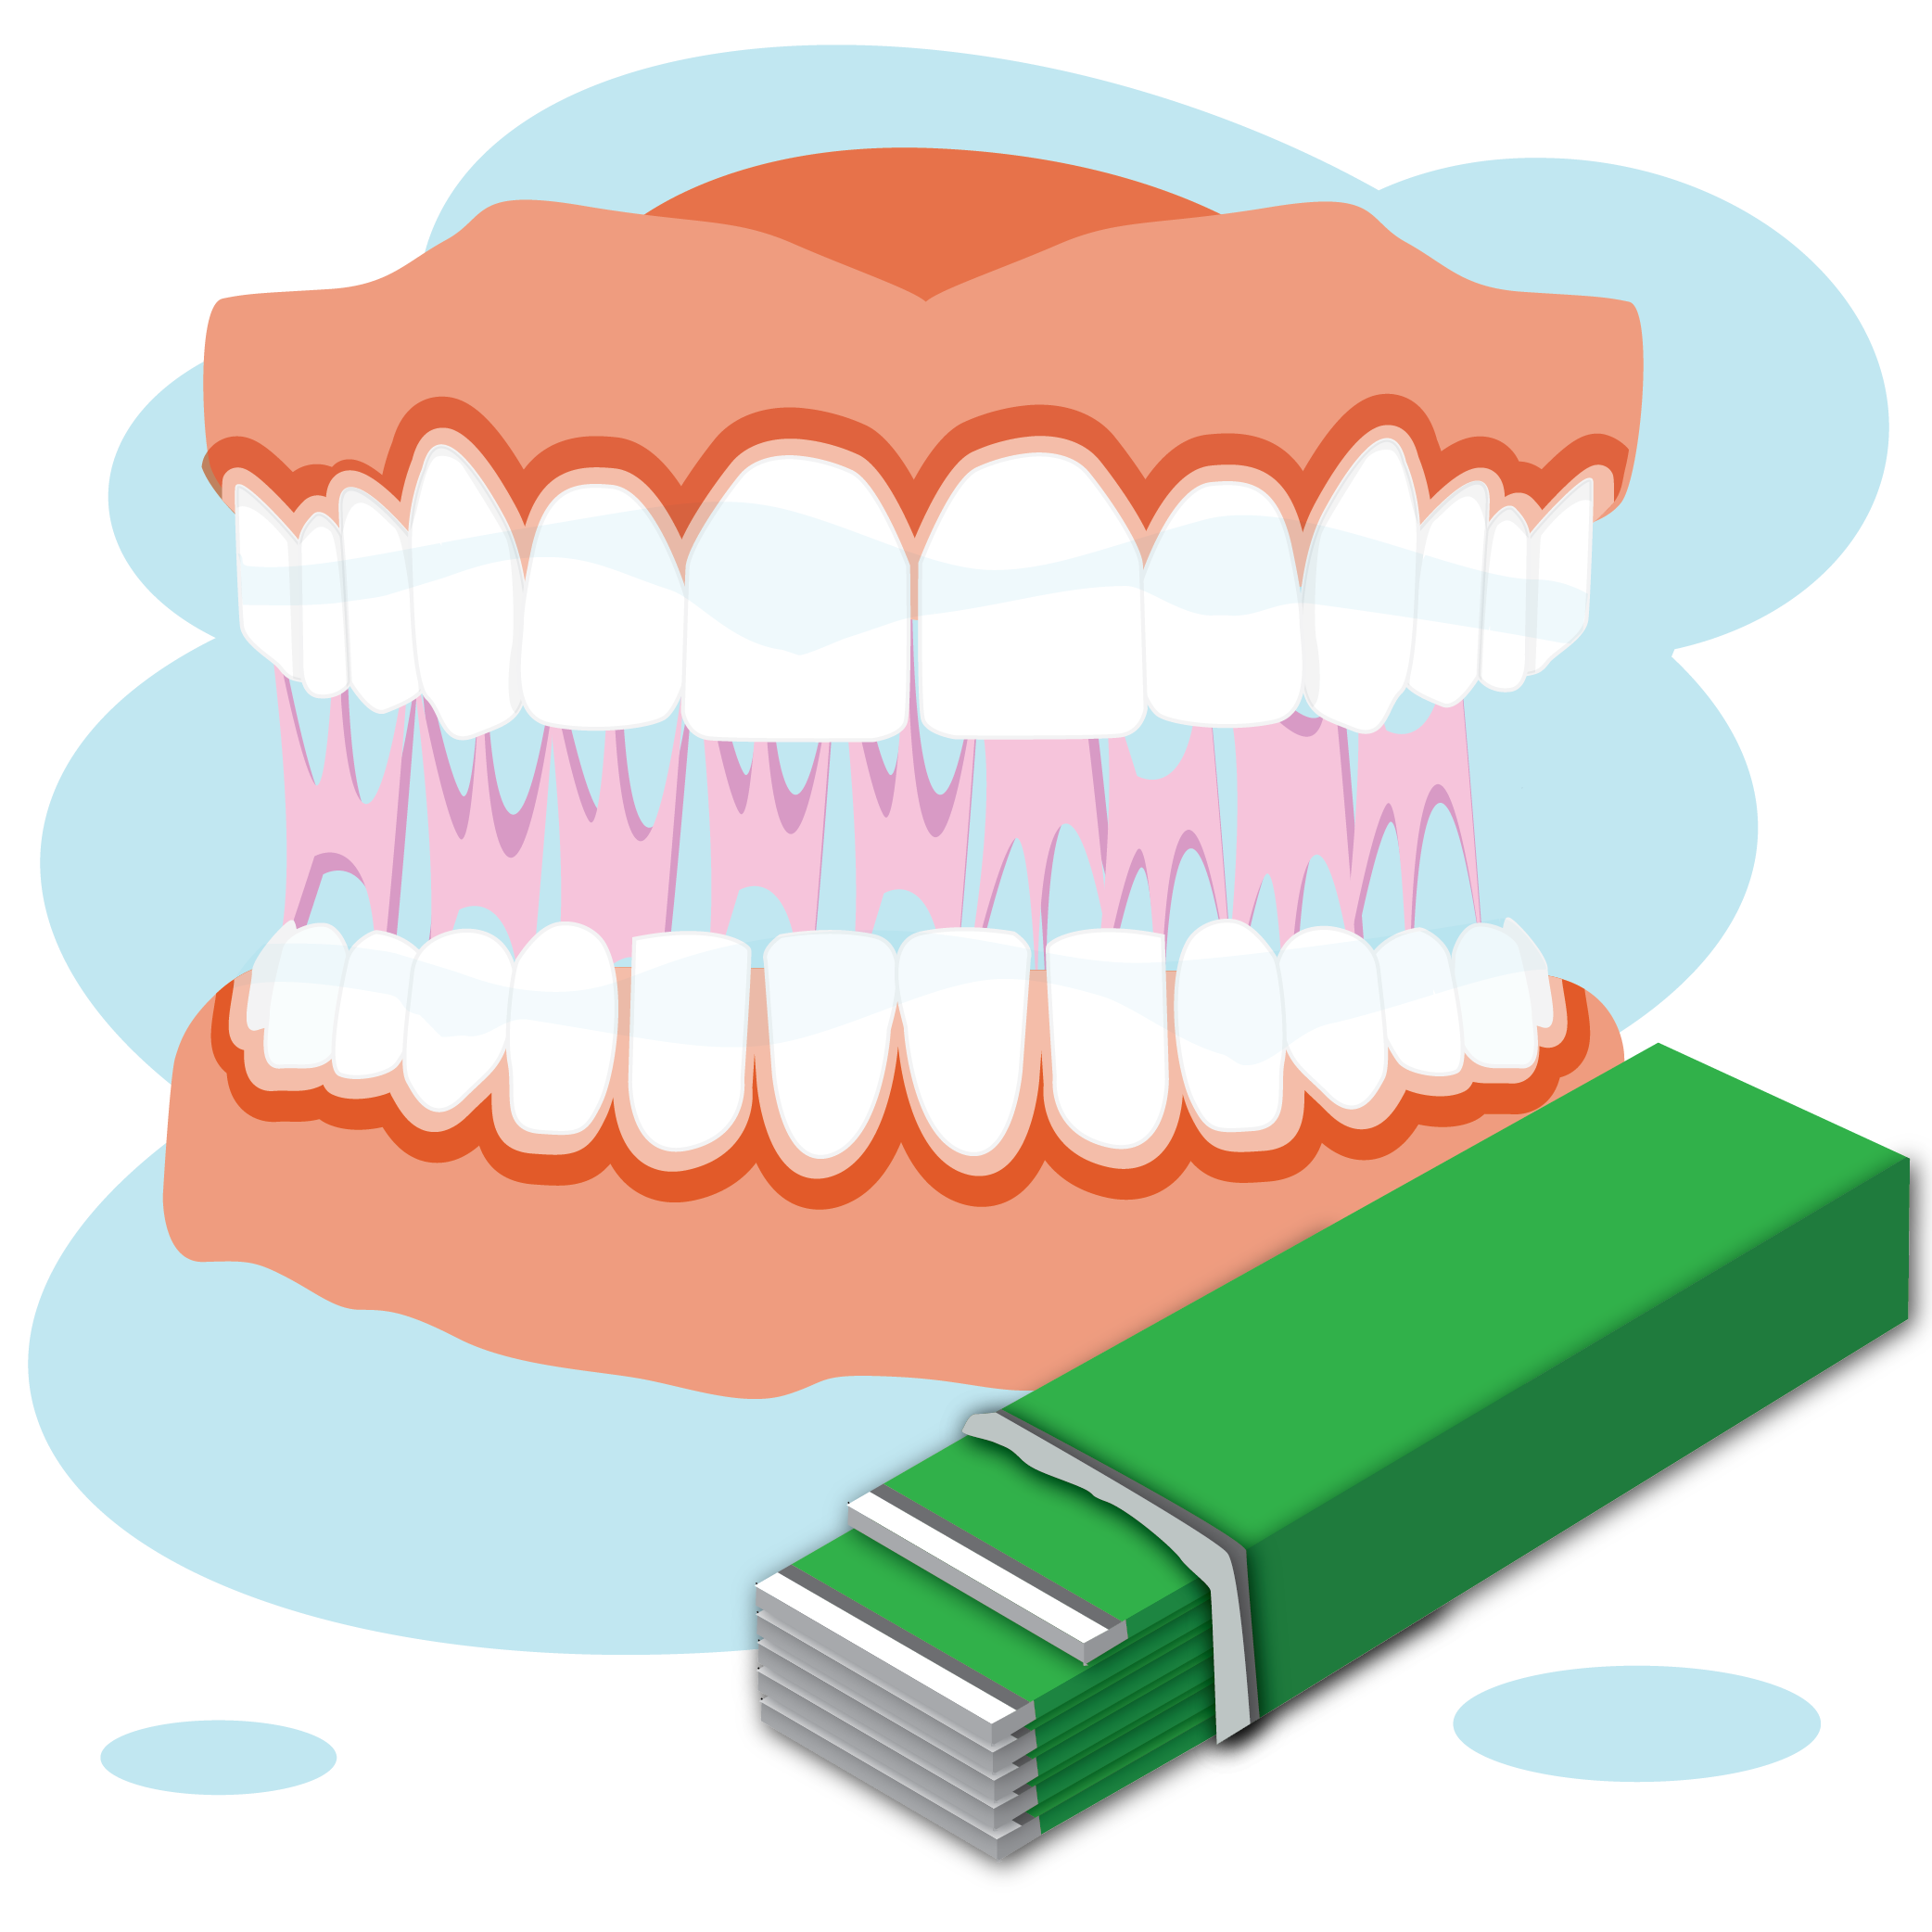 Illustration of teeth within jaw with pink sticky gum being pulled between the top and bottom teeth. An illustration of a pack of gum in a green wrapper in the foreground 